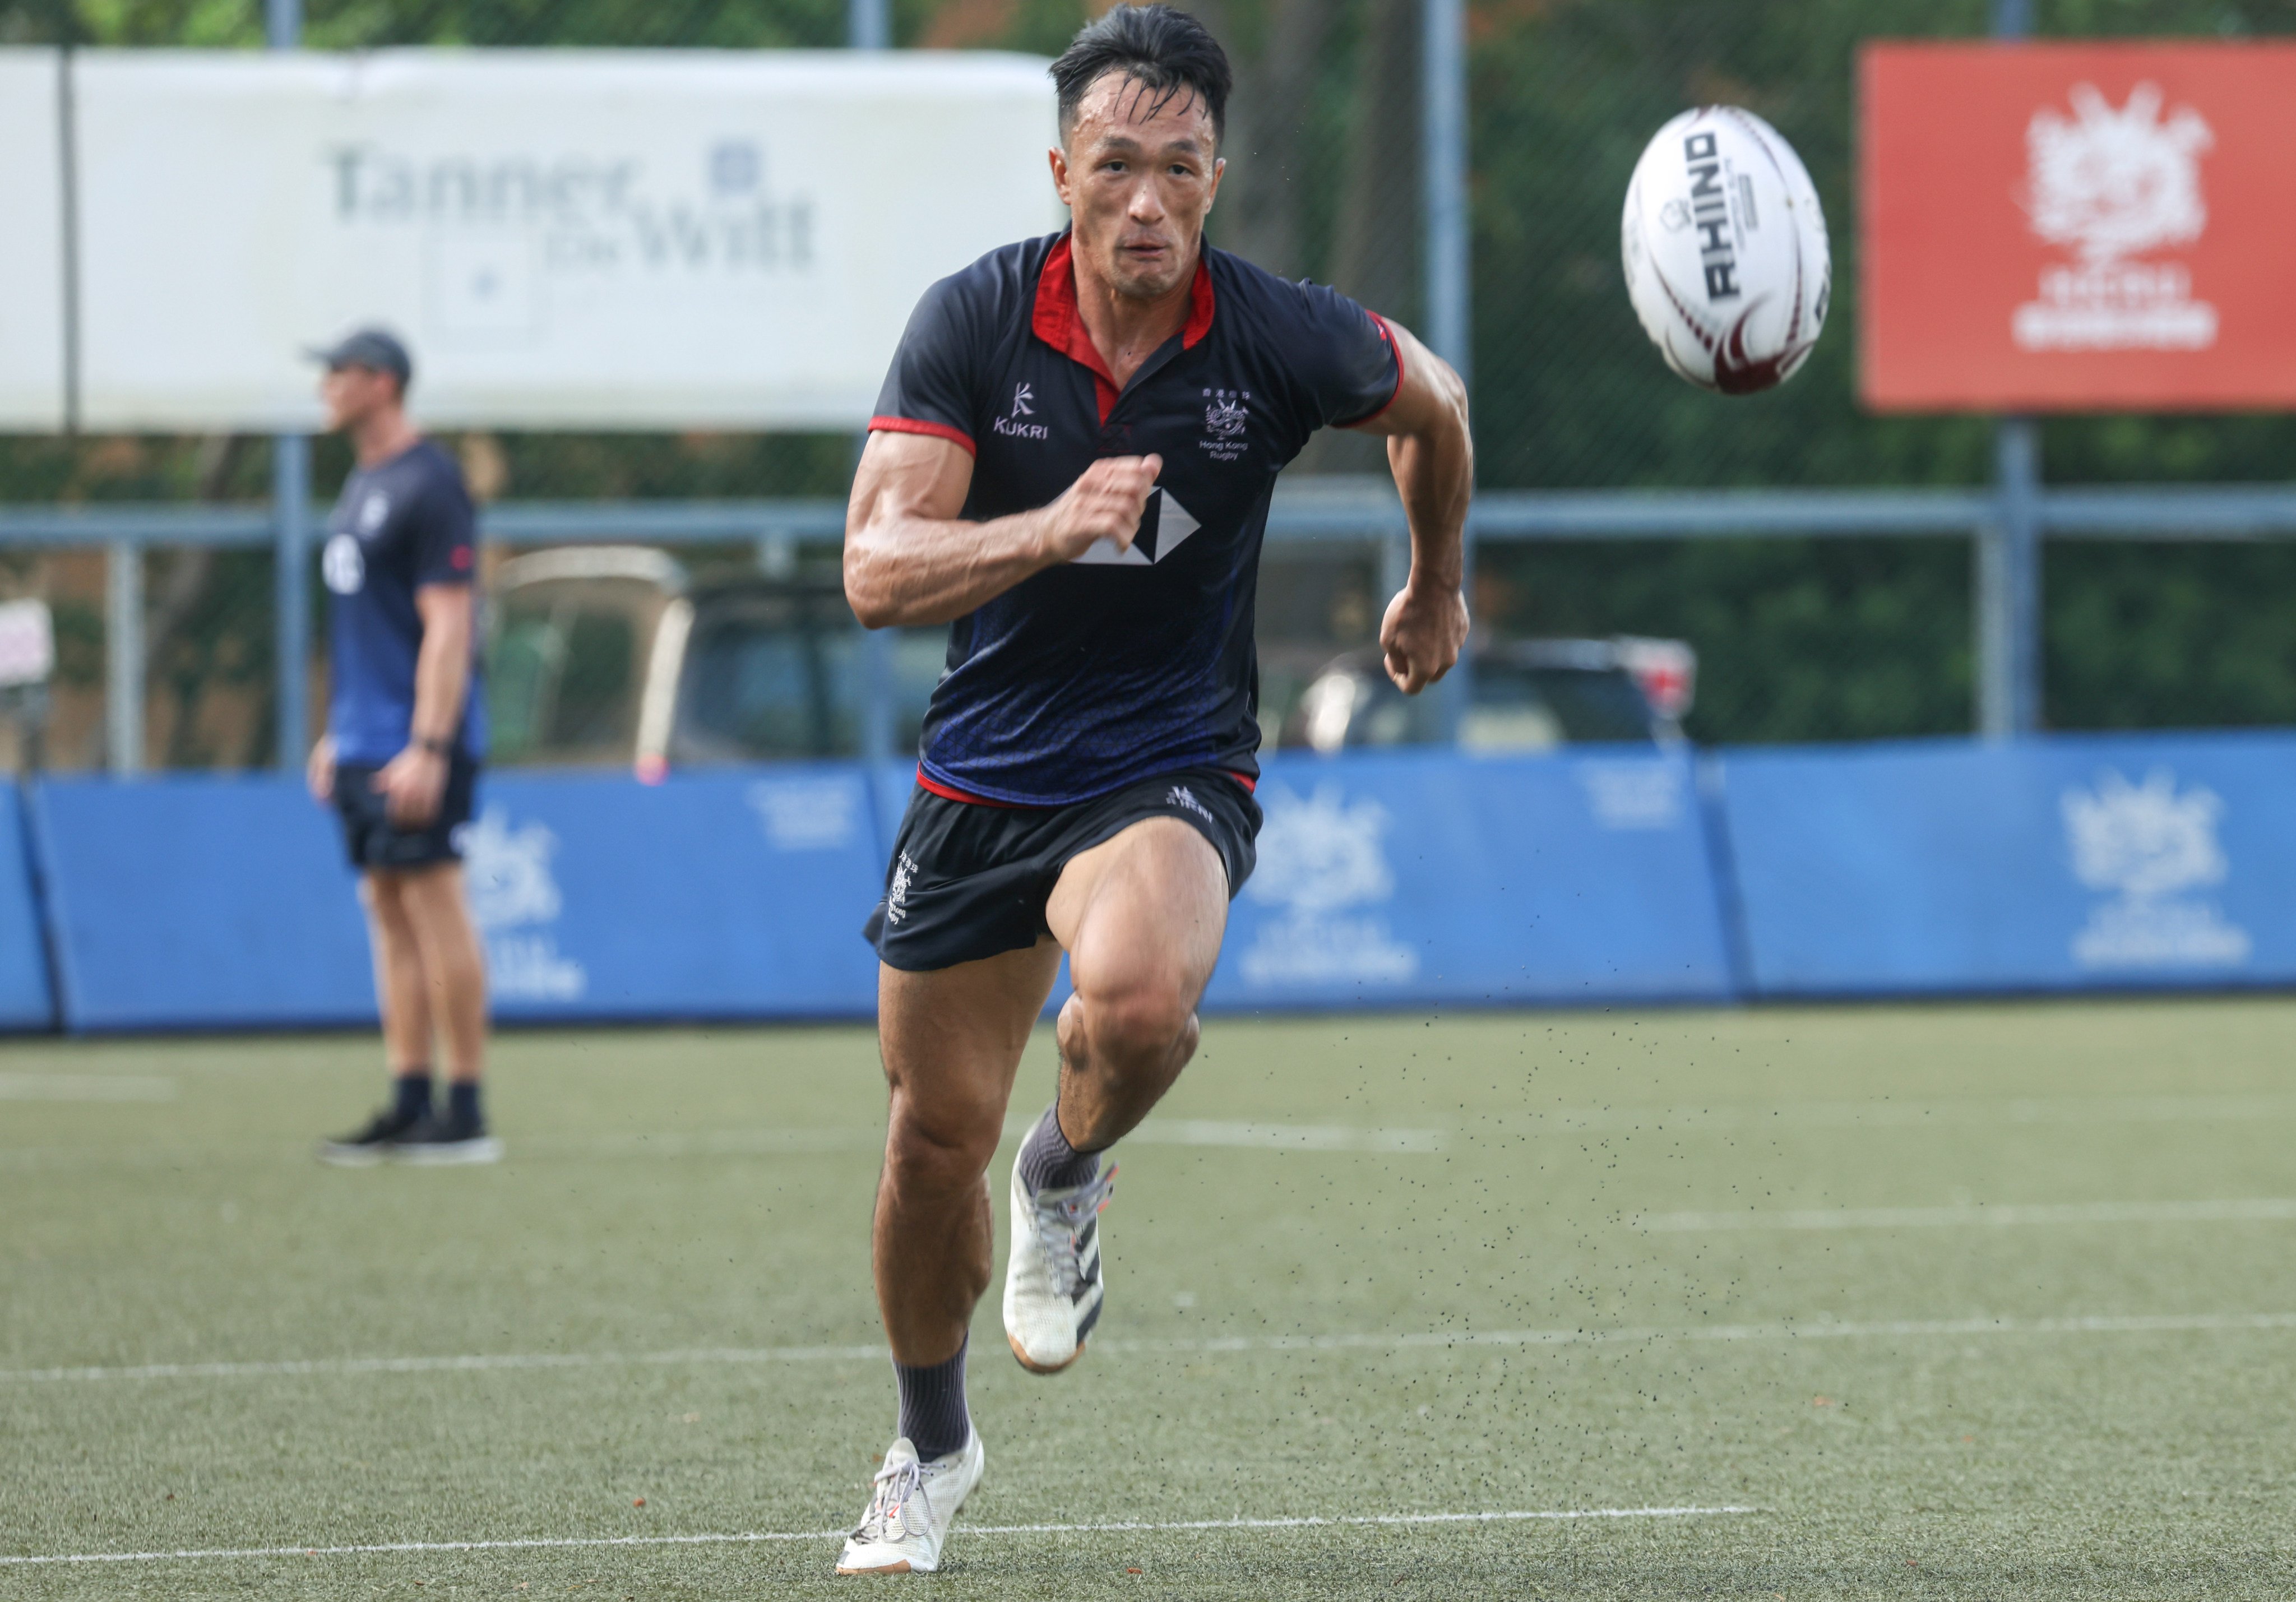 Salom Yiu Kam-shing is deliberating over whether to keep his eye on the ball and prolong a decorated rugby sevens career following Asian Games gold. Photo: SCMP/ Yik Yeung-man